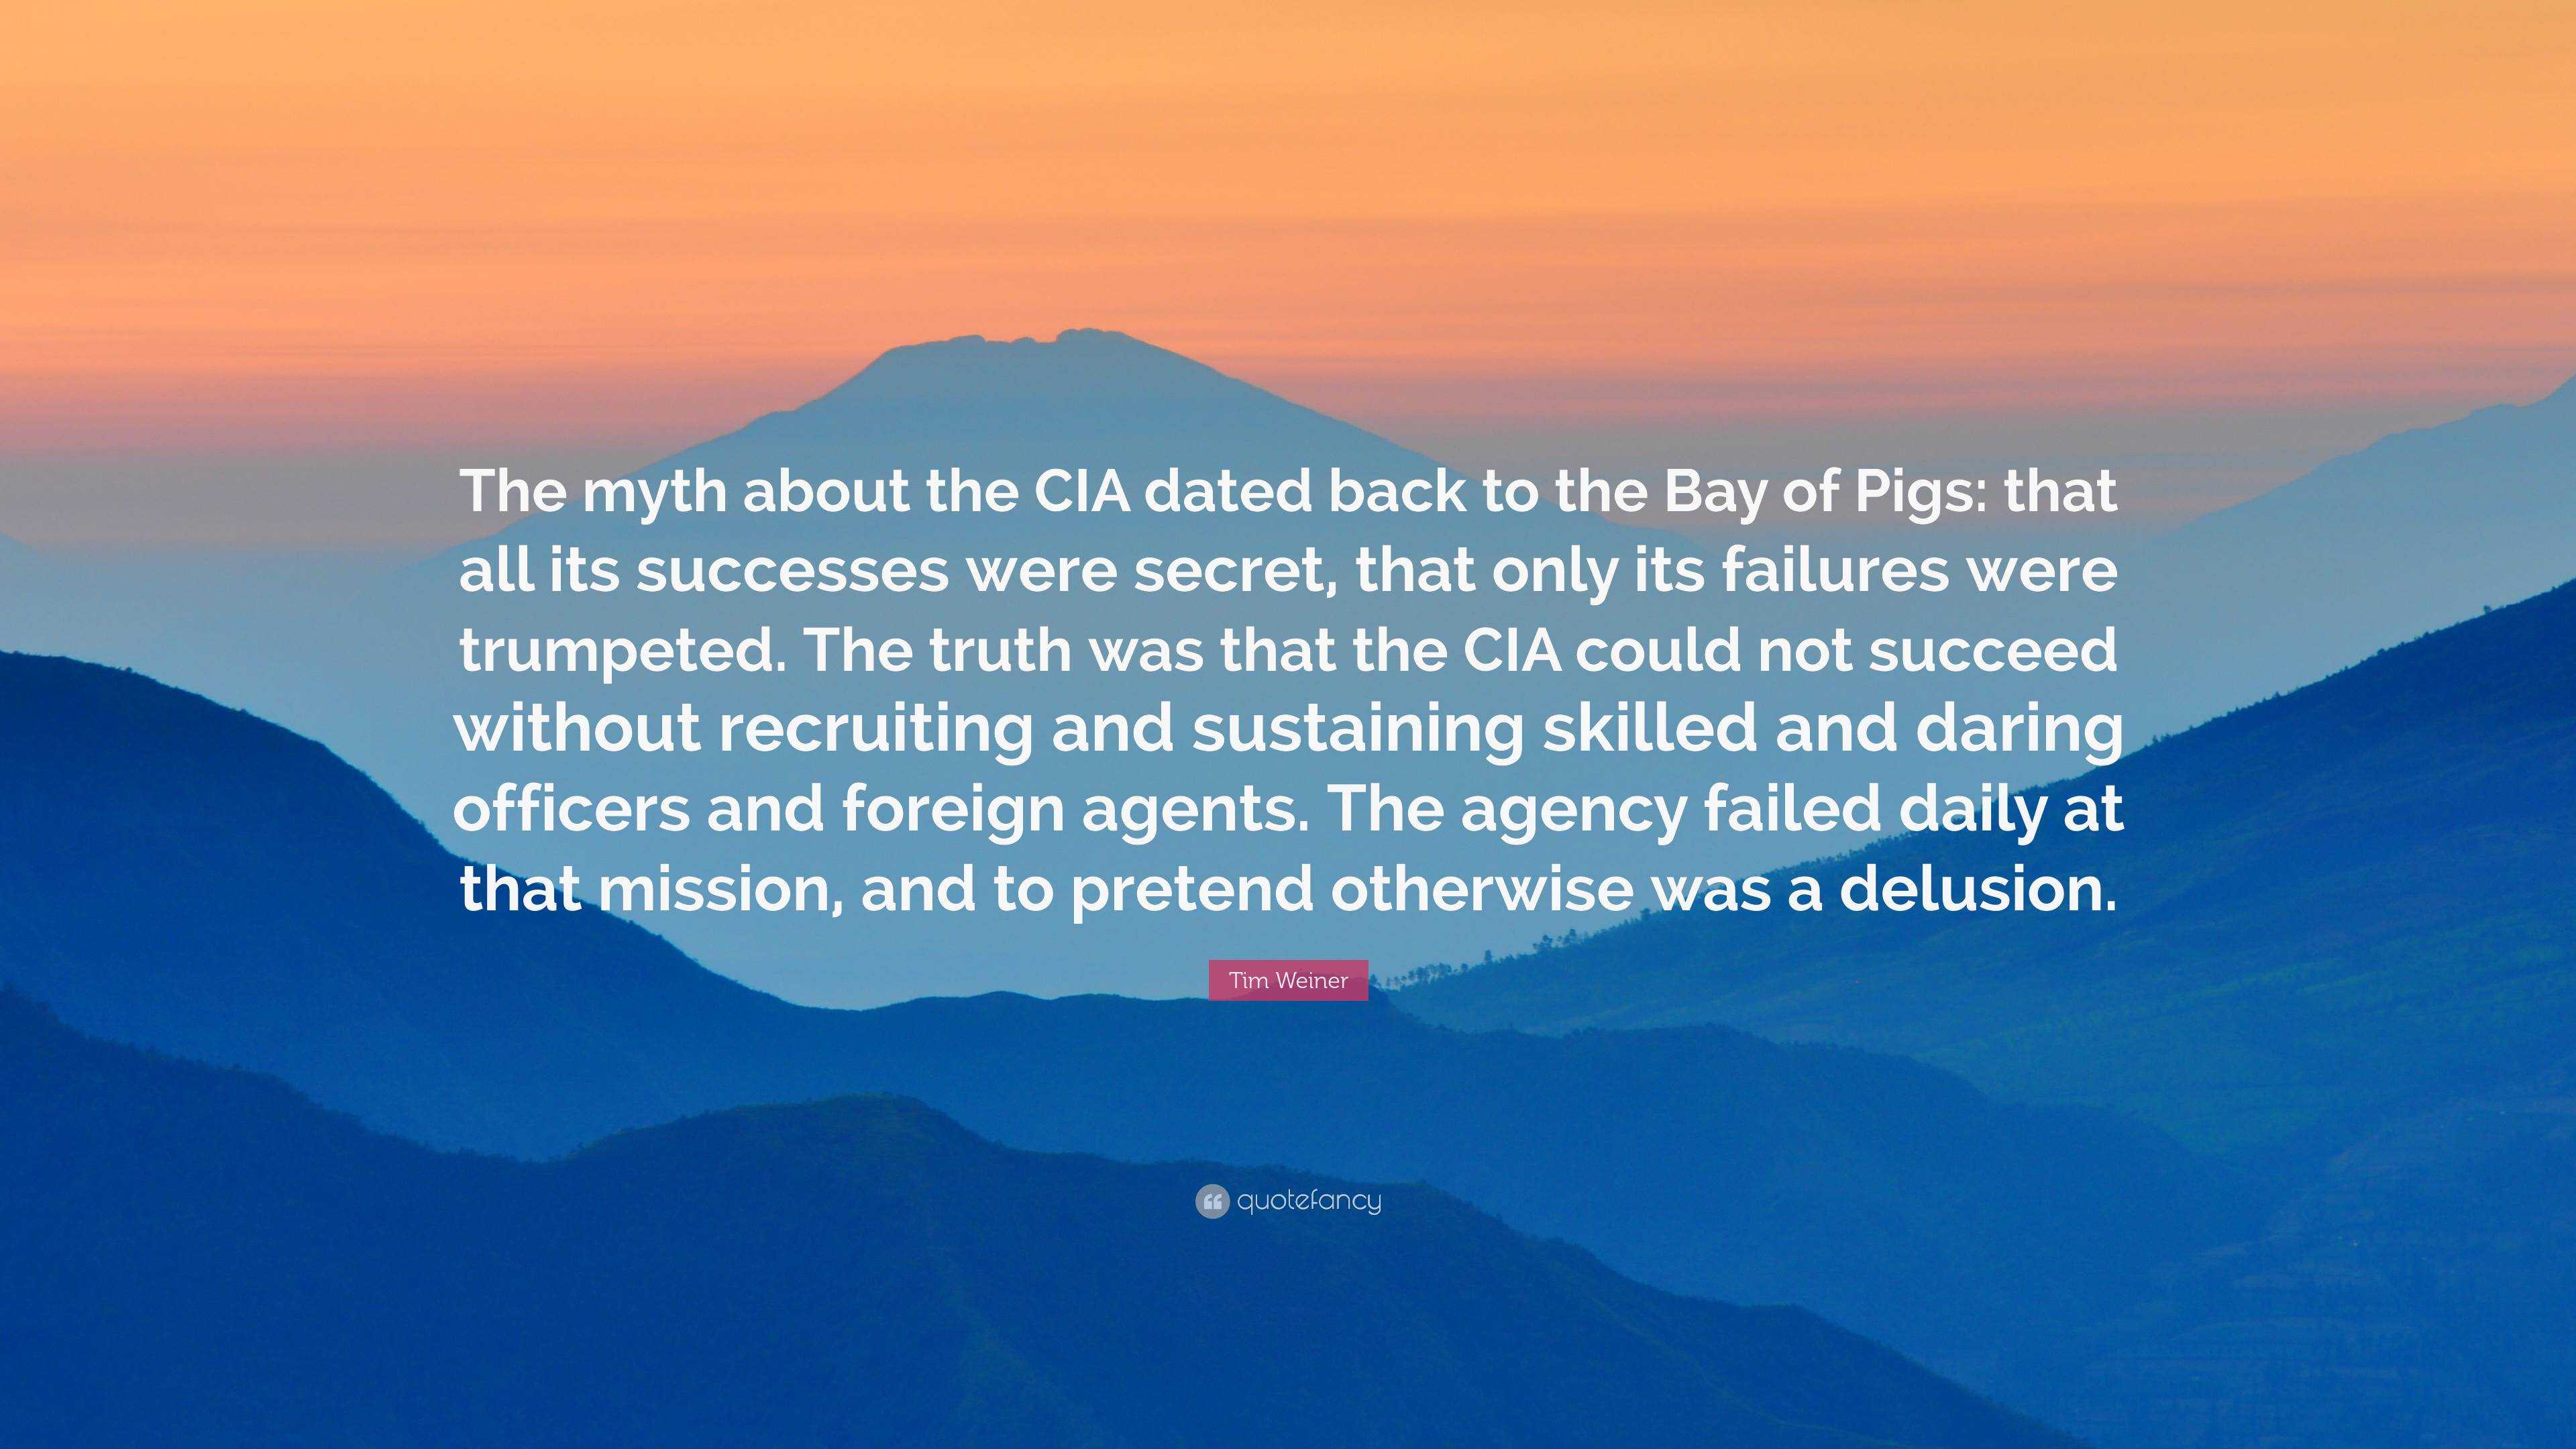 Tim Weiner Quote: “The myth about the CIA dated back the Bay of Pigs: all its were secret, only its failures were tr...”